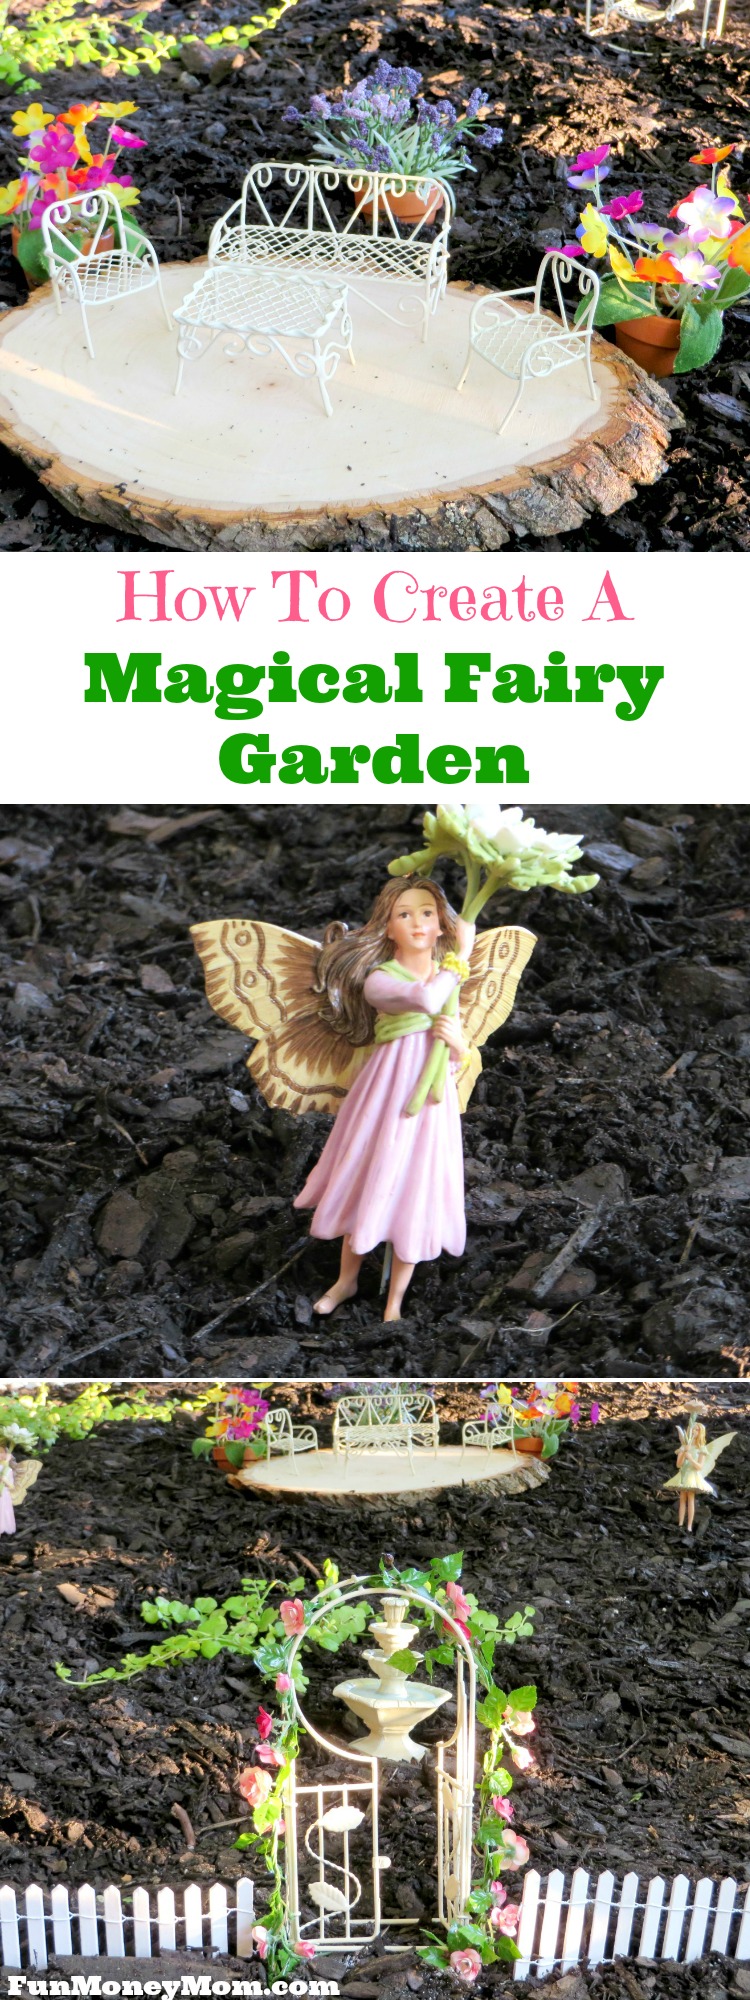 Step up the landscaping a notch and create a beautiful and magical fairy garden that any fairy would love to call home!